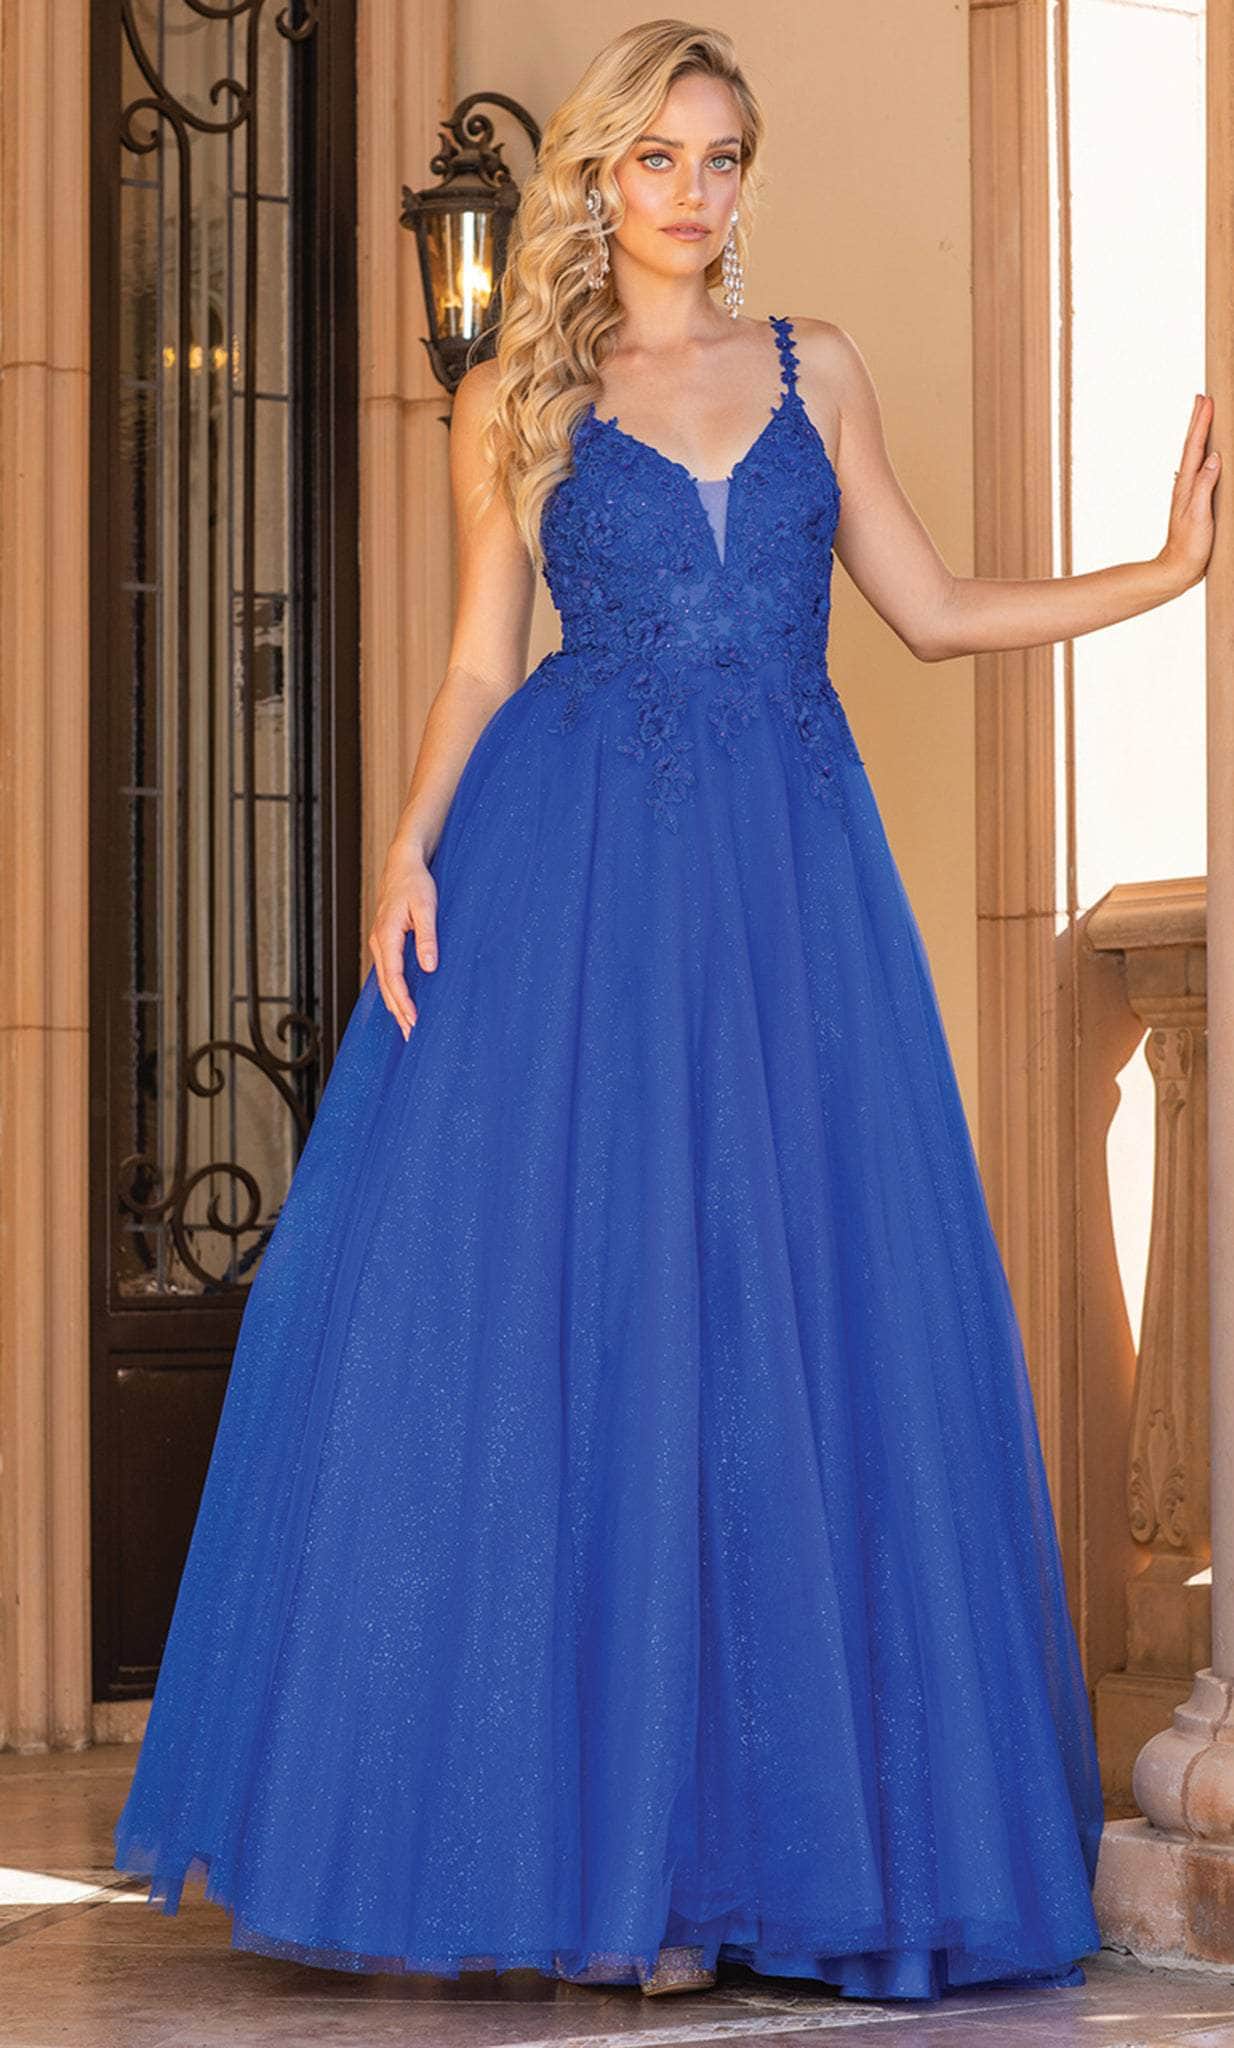 Dancing Queen 4328 - Embroidery-Detailed A-line Gown
